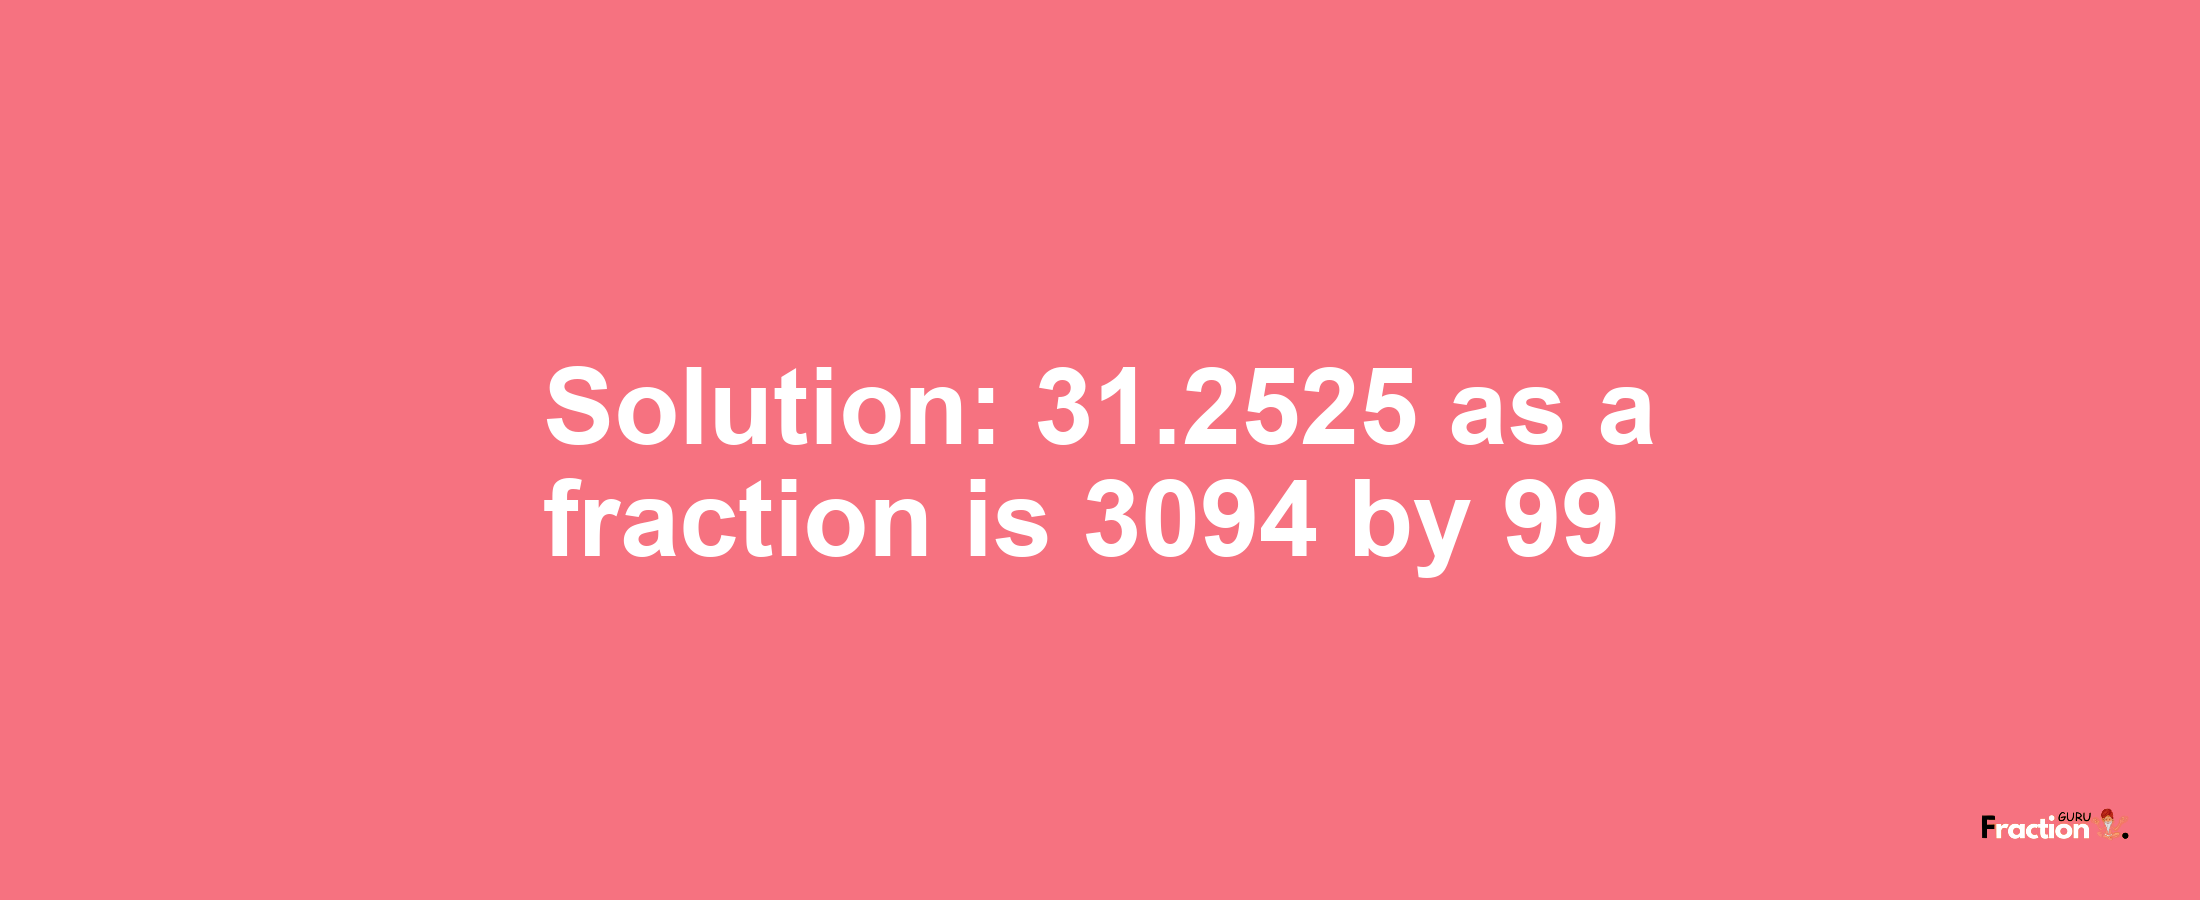 Solution:31.2525 as a fraction is 3094/99